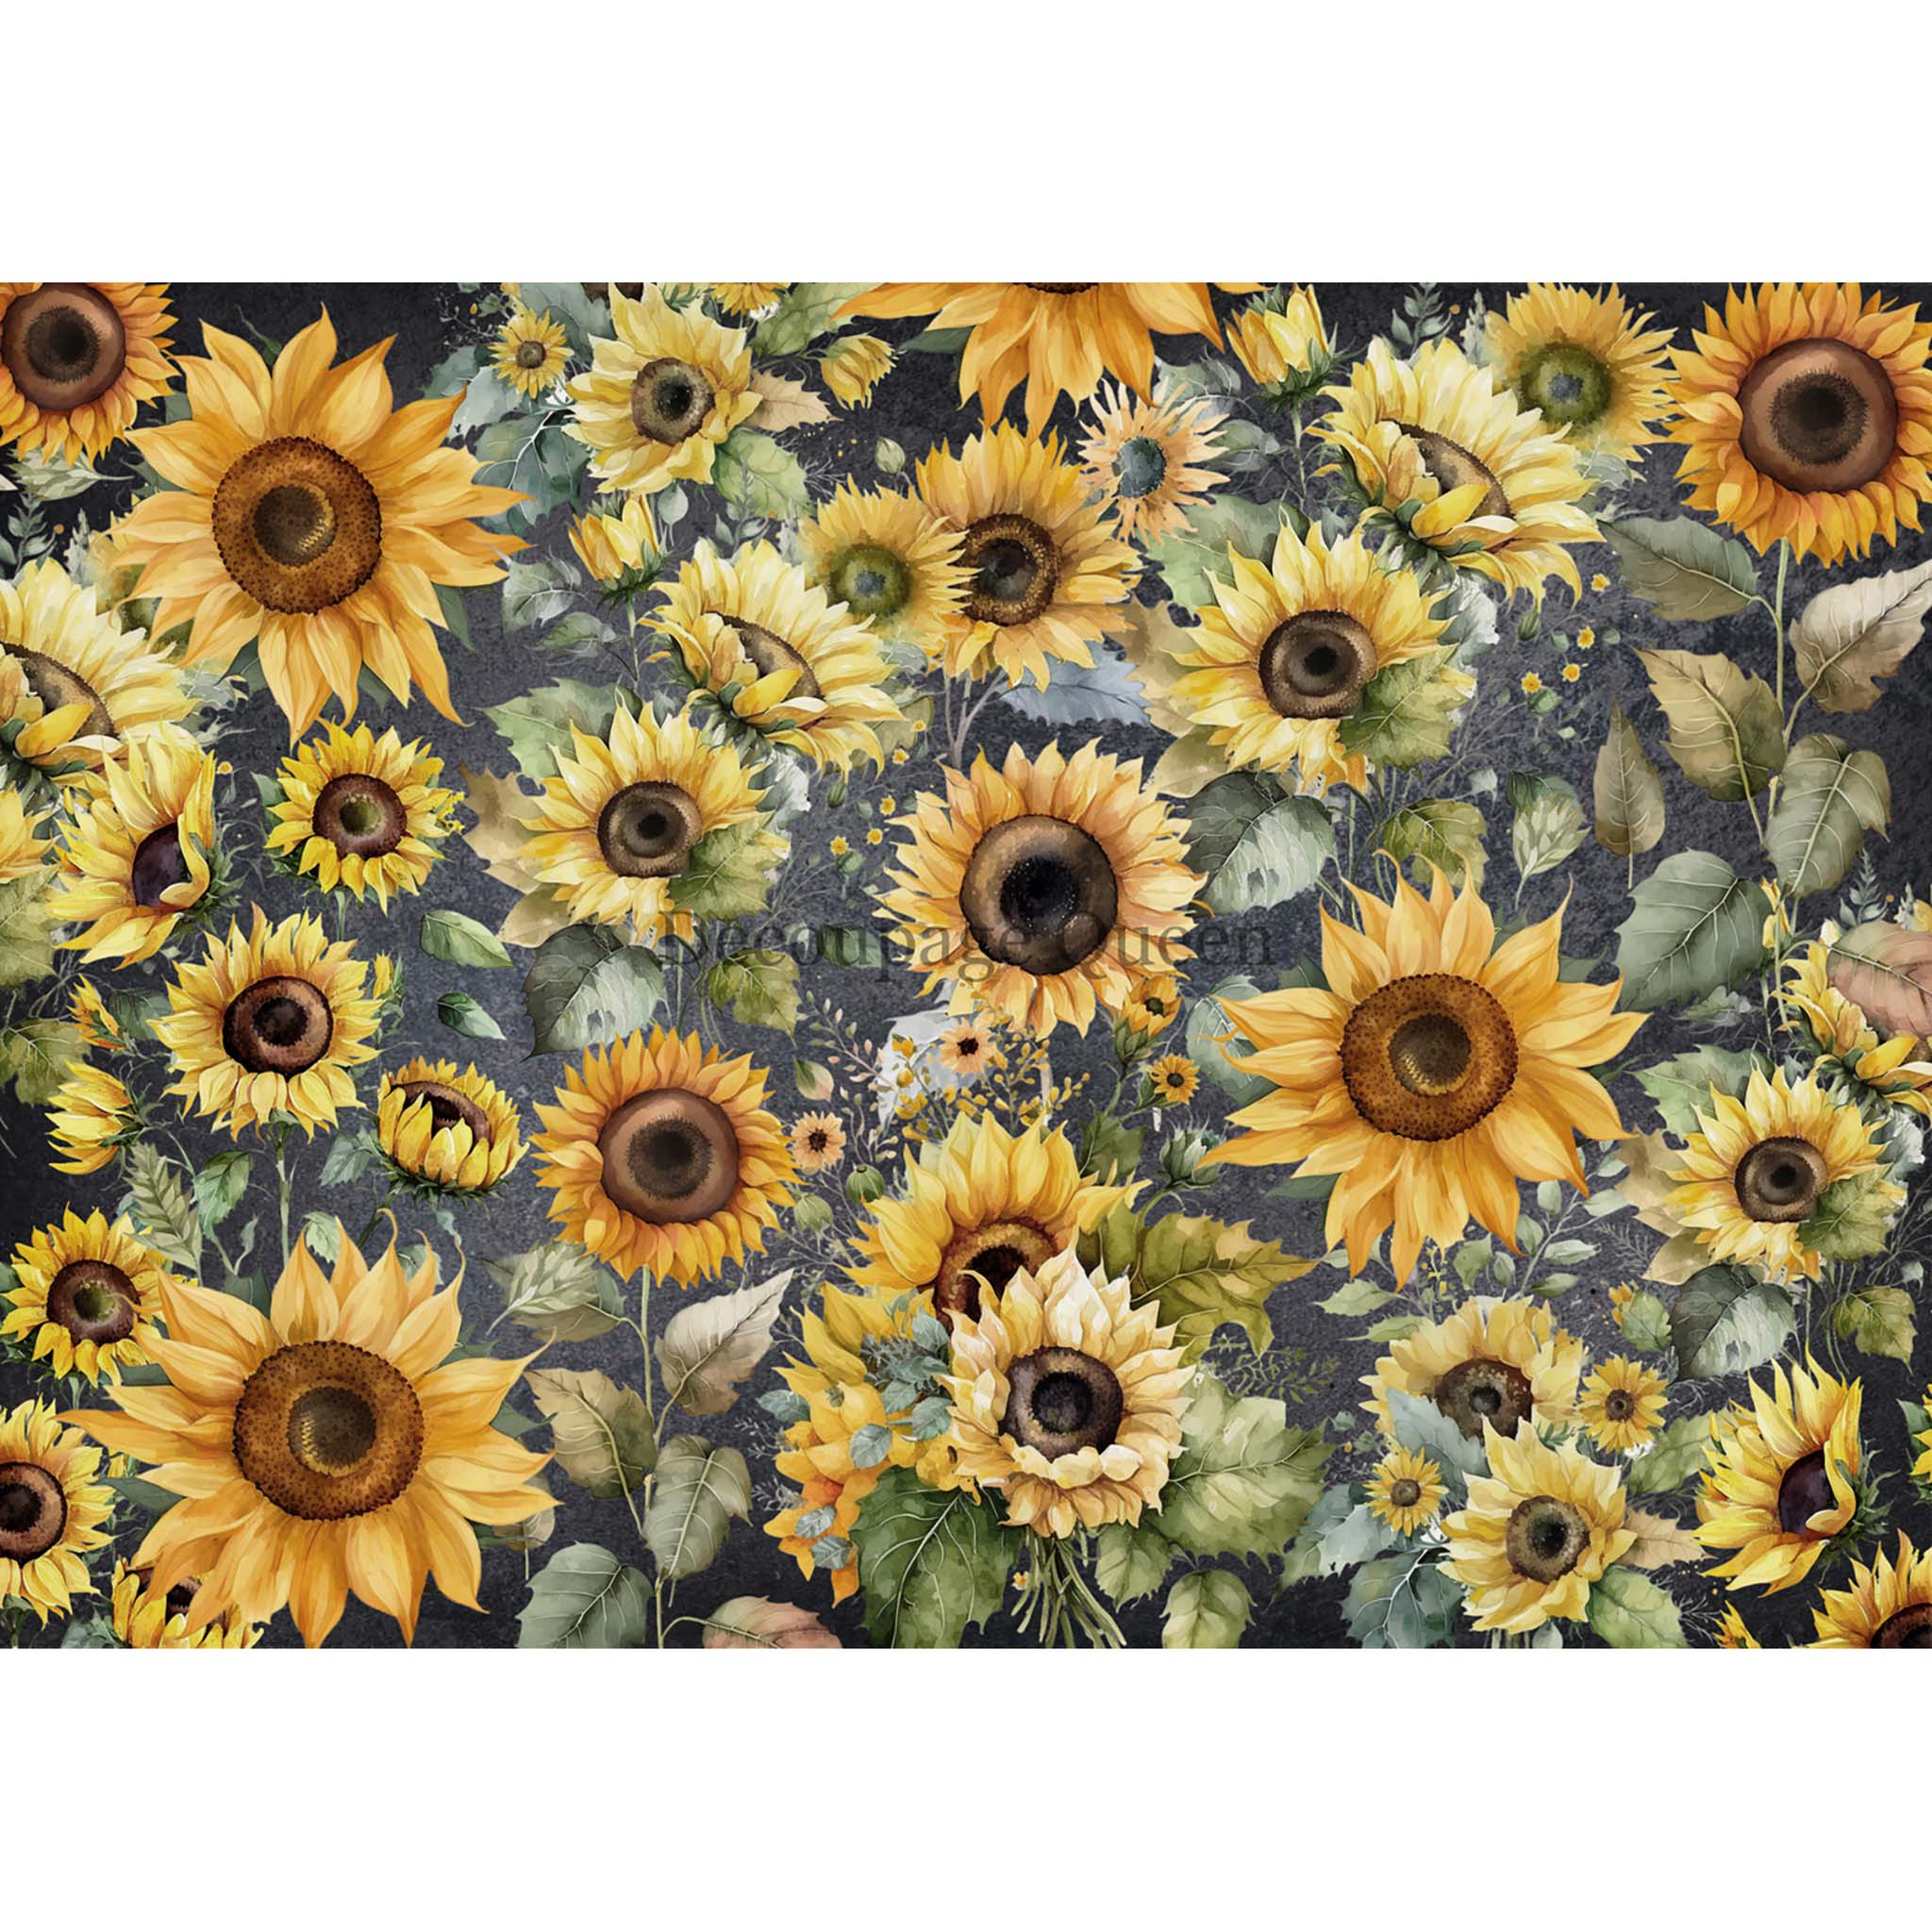 A1 rice paper design featuring cheerful sunflowers bursting across a grey background. White borders are on the top and bottom.